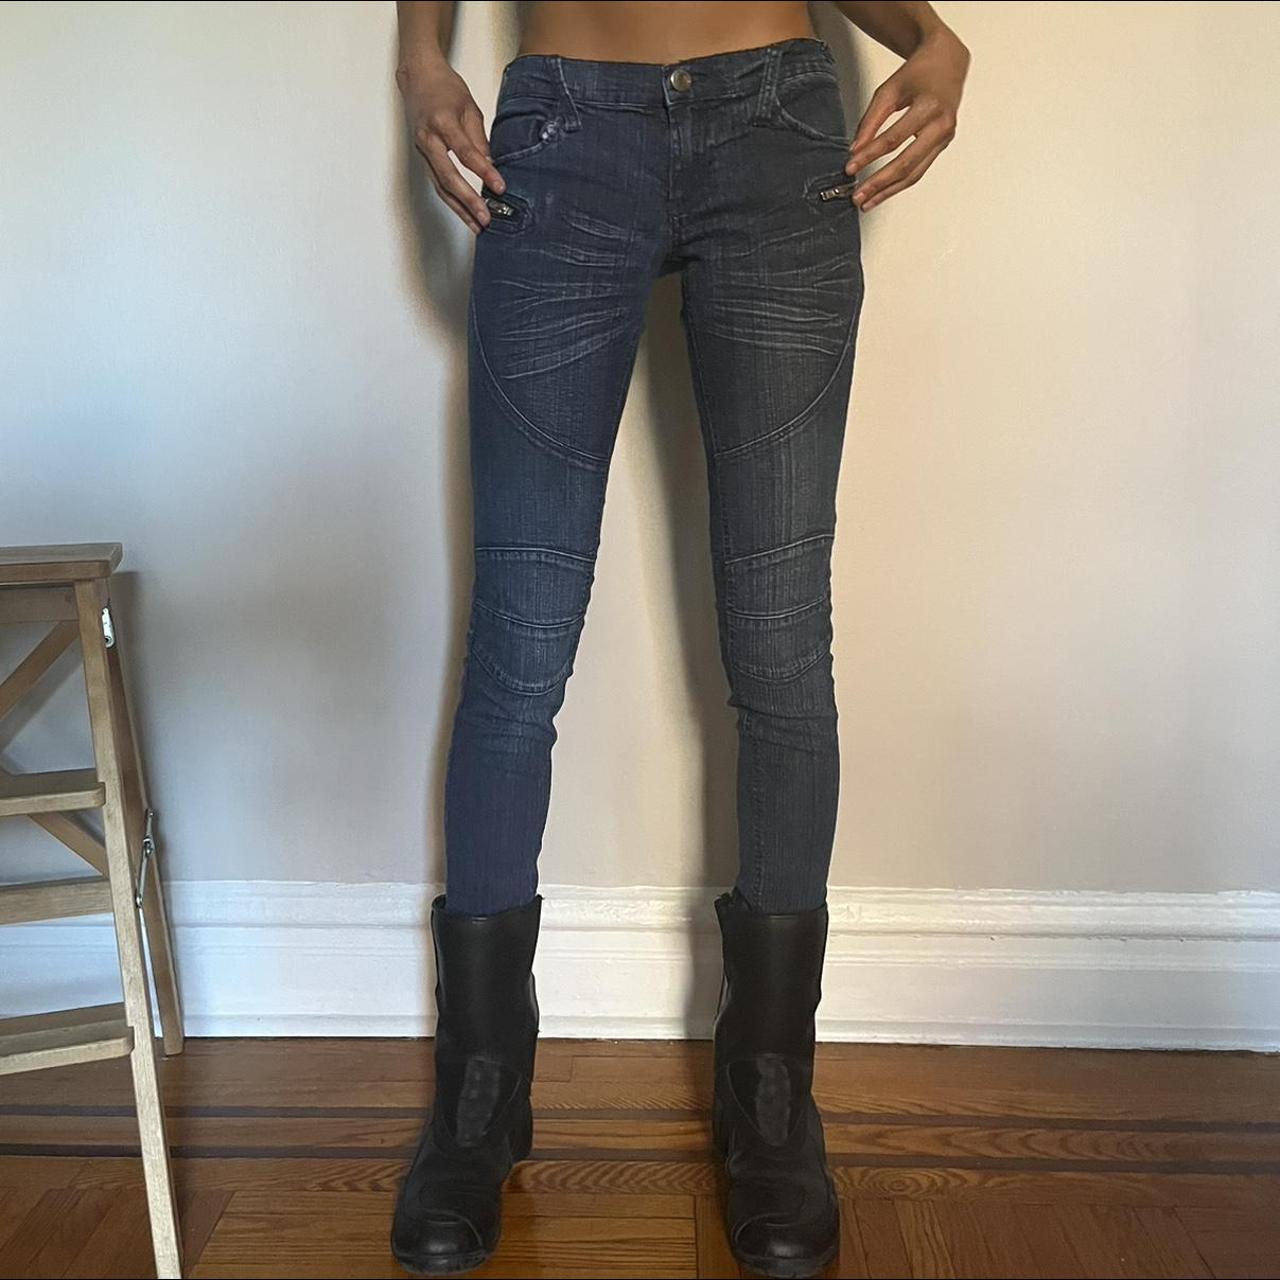 abbey dawn jeans perf condition, bought them a few... - Depop